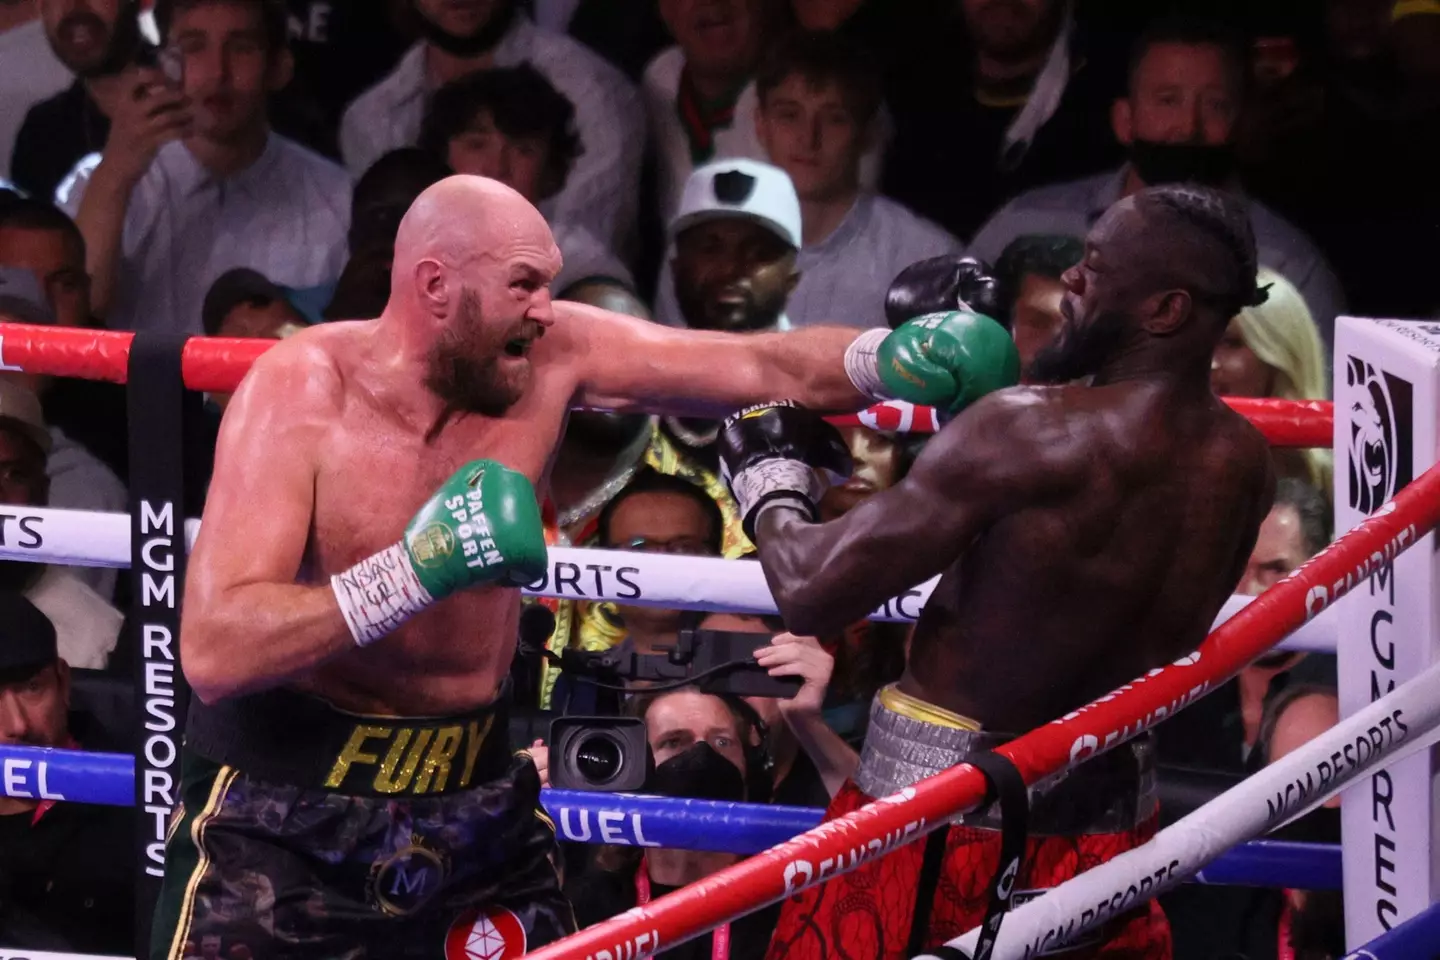 Fury believes he deserves to win the award - but doesn't want to.